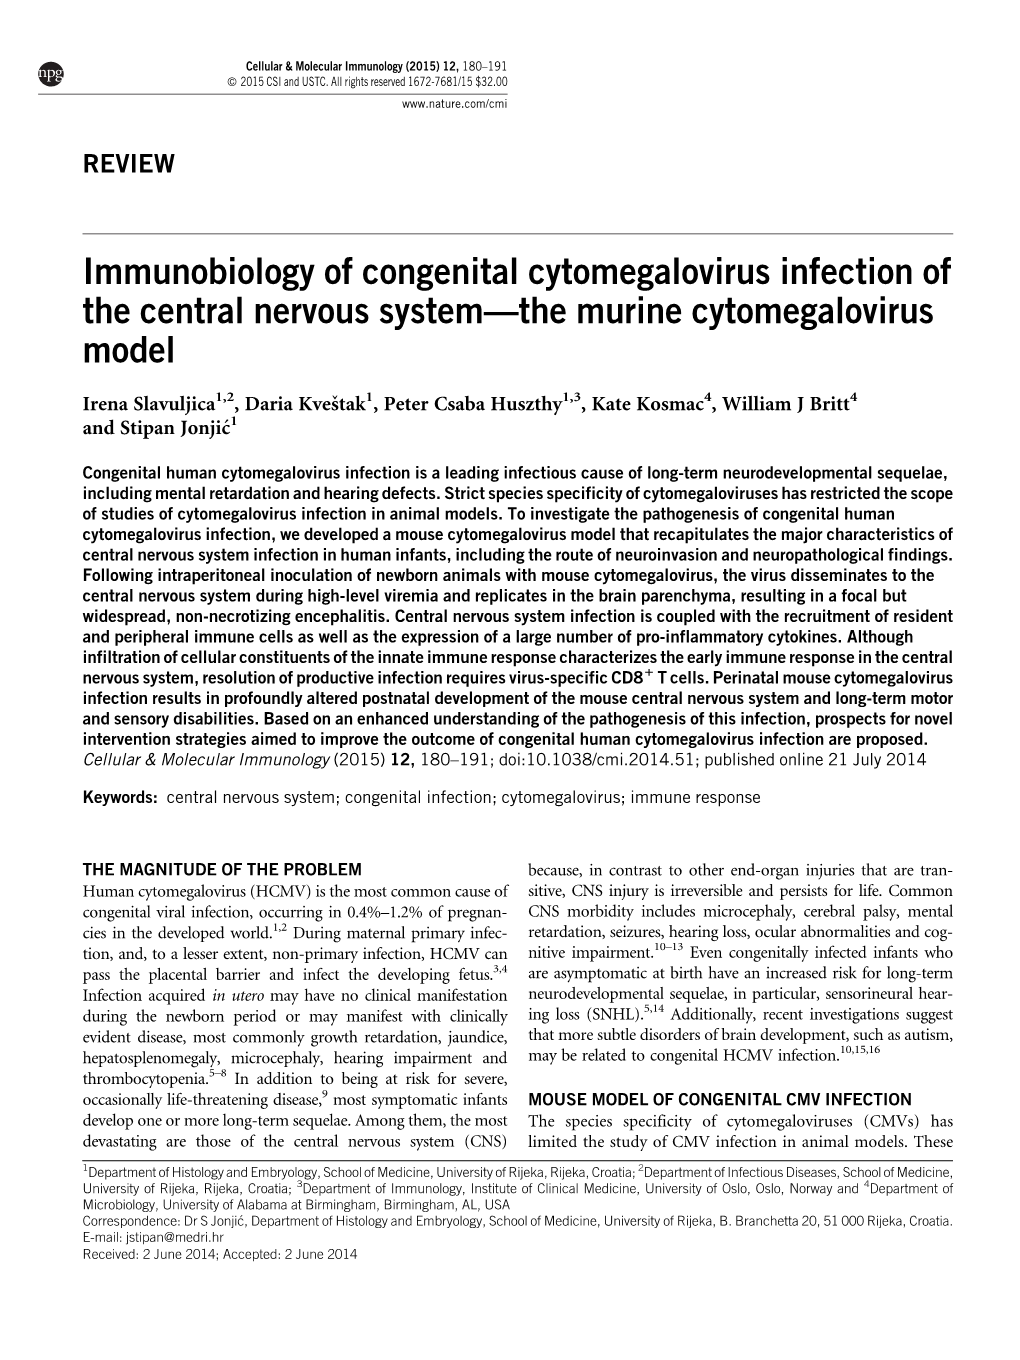 Immunobiology of Congenital Cytomegalovirus Infection of the Central Nervous System—The Murine Cytomegalovirus Model